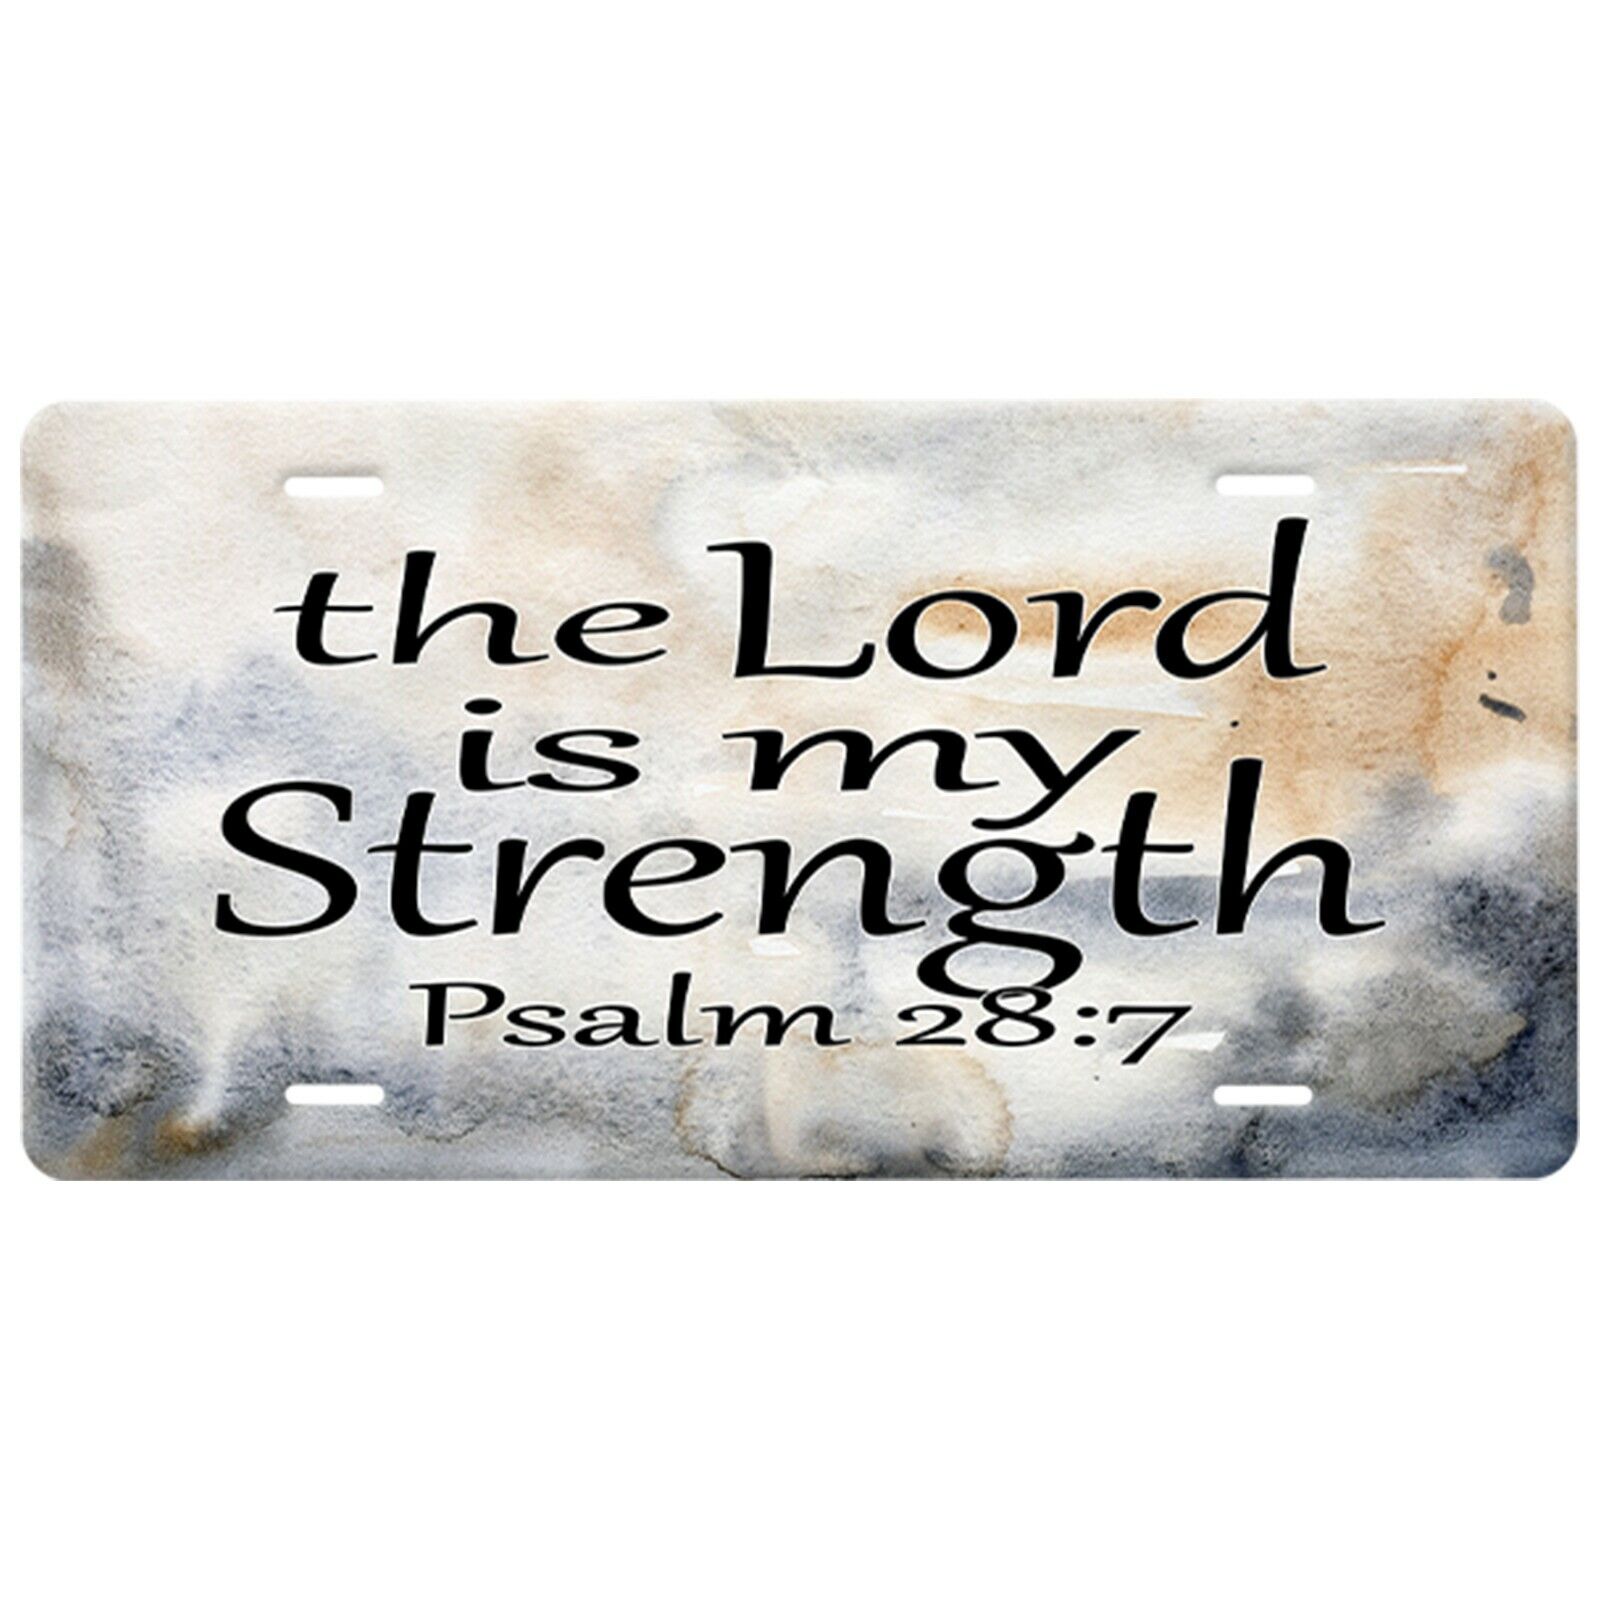 Psalm 28:7-The Lord Is My Strength-Christian License Plate-Black Quote-Cool Blue